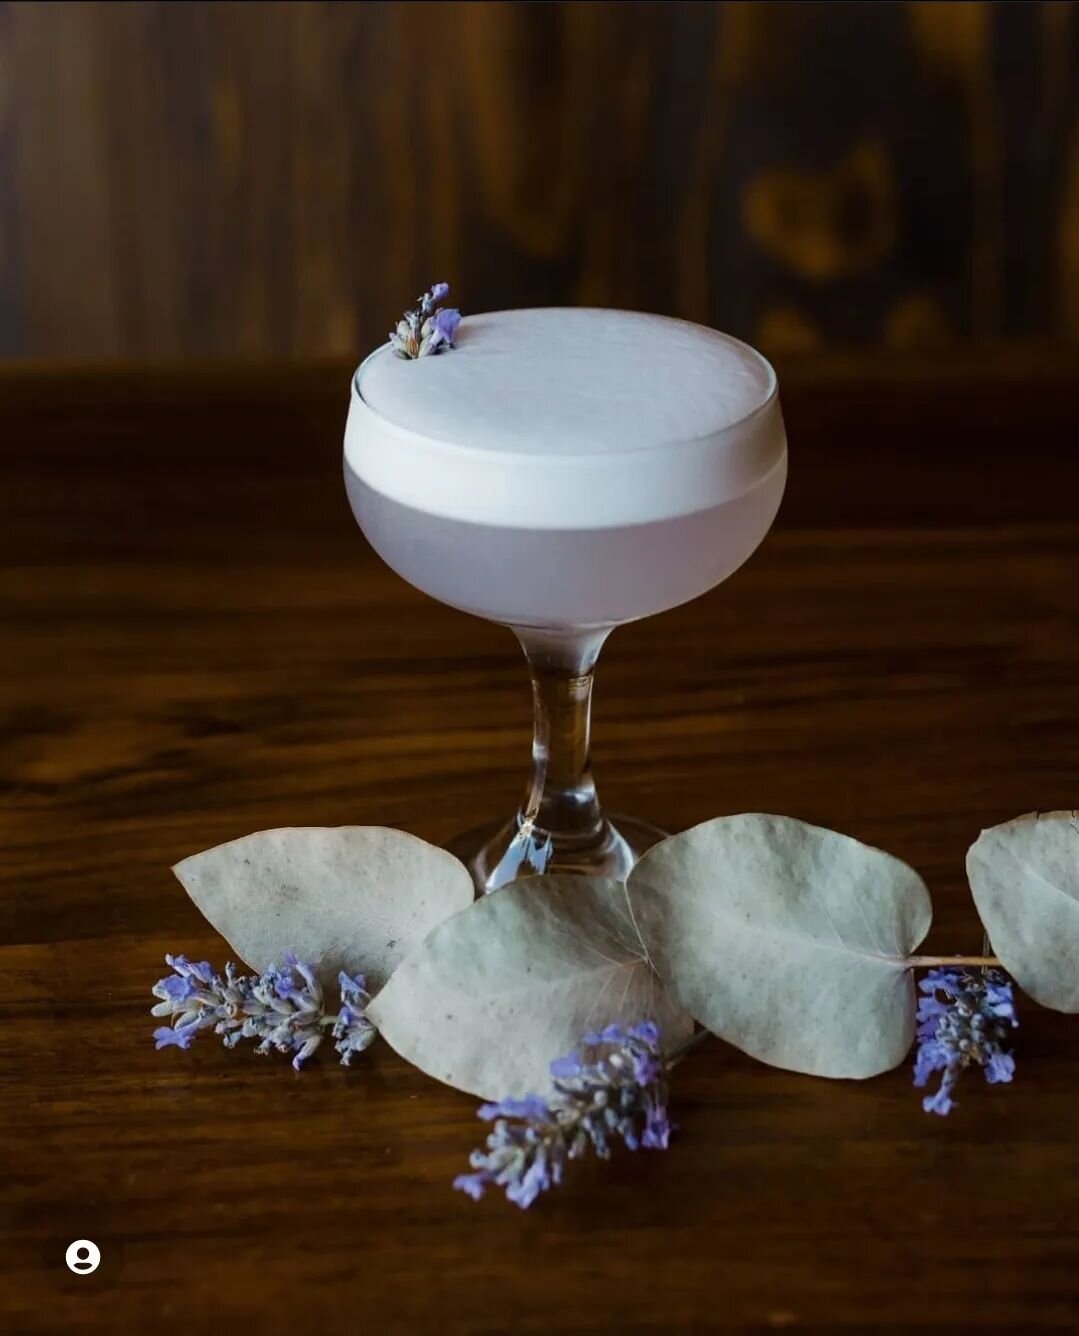 Coming back during Lavender Month we had to bring back this RW classic: The Lavender Haze.

Find it alongside a handful of other past favorites on our house-cocktail list, available now! 

We're here tonight until 10, back tomorrow 4-10, and here Thu